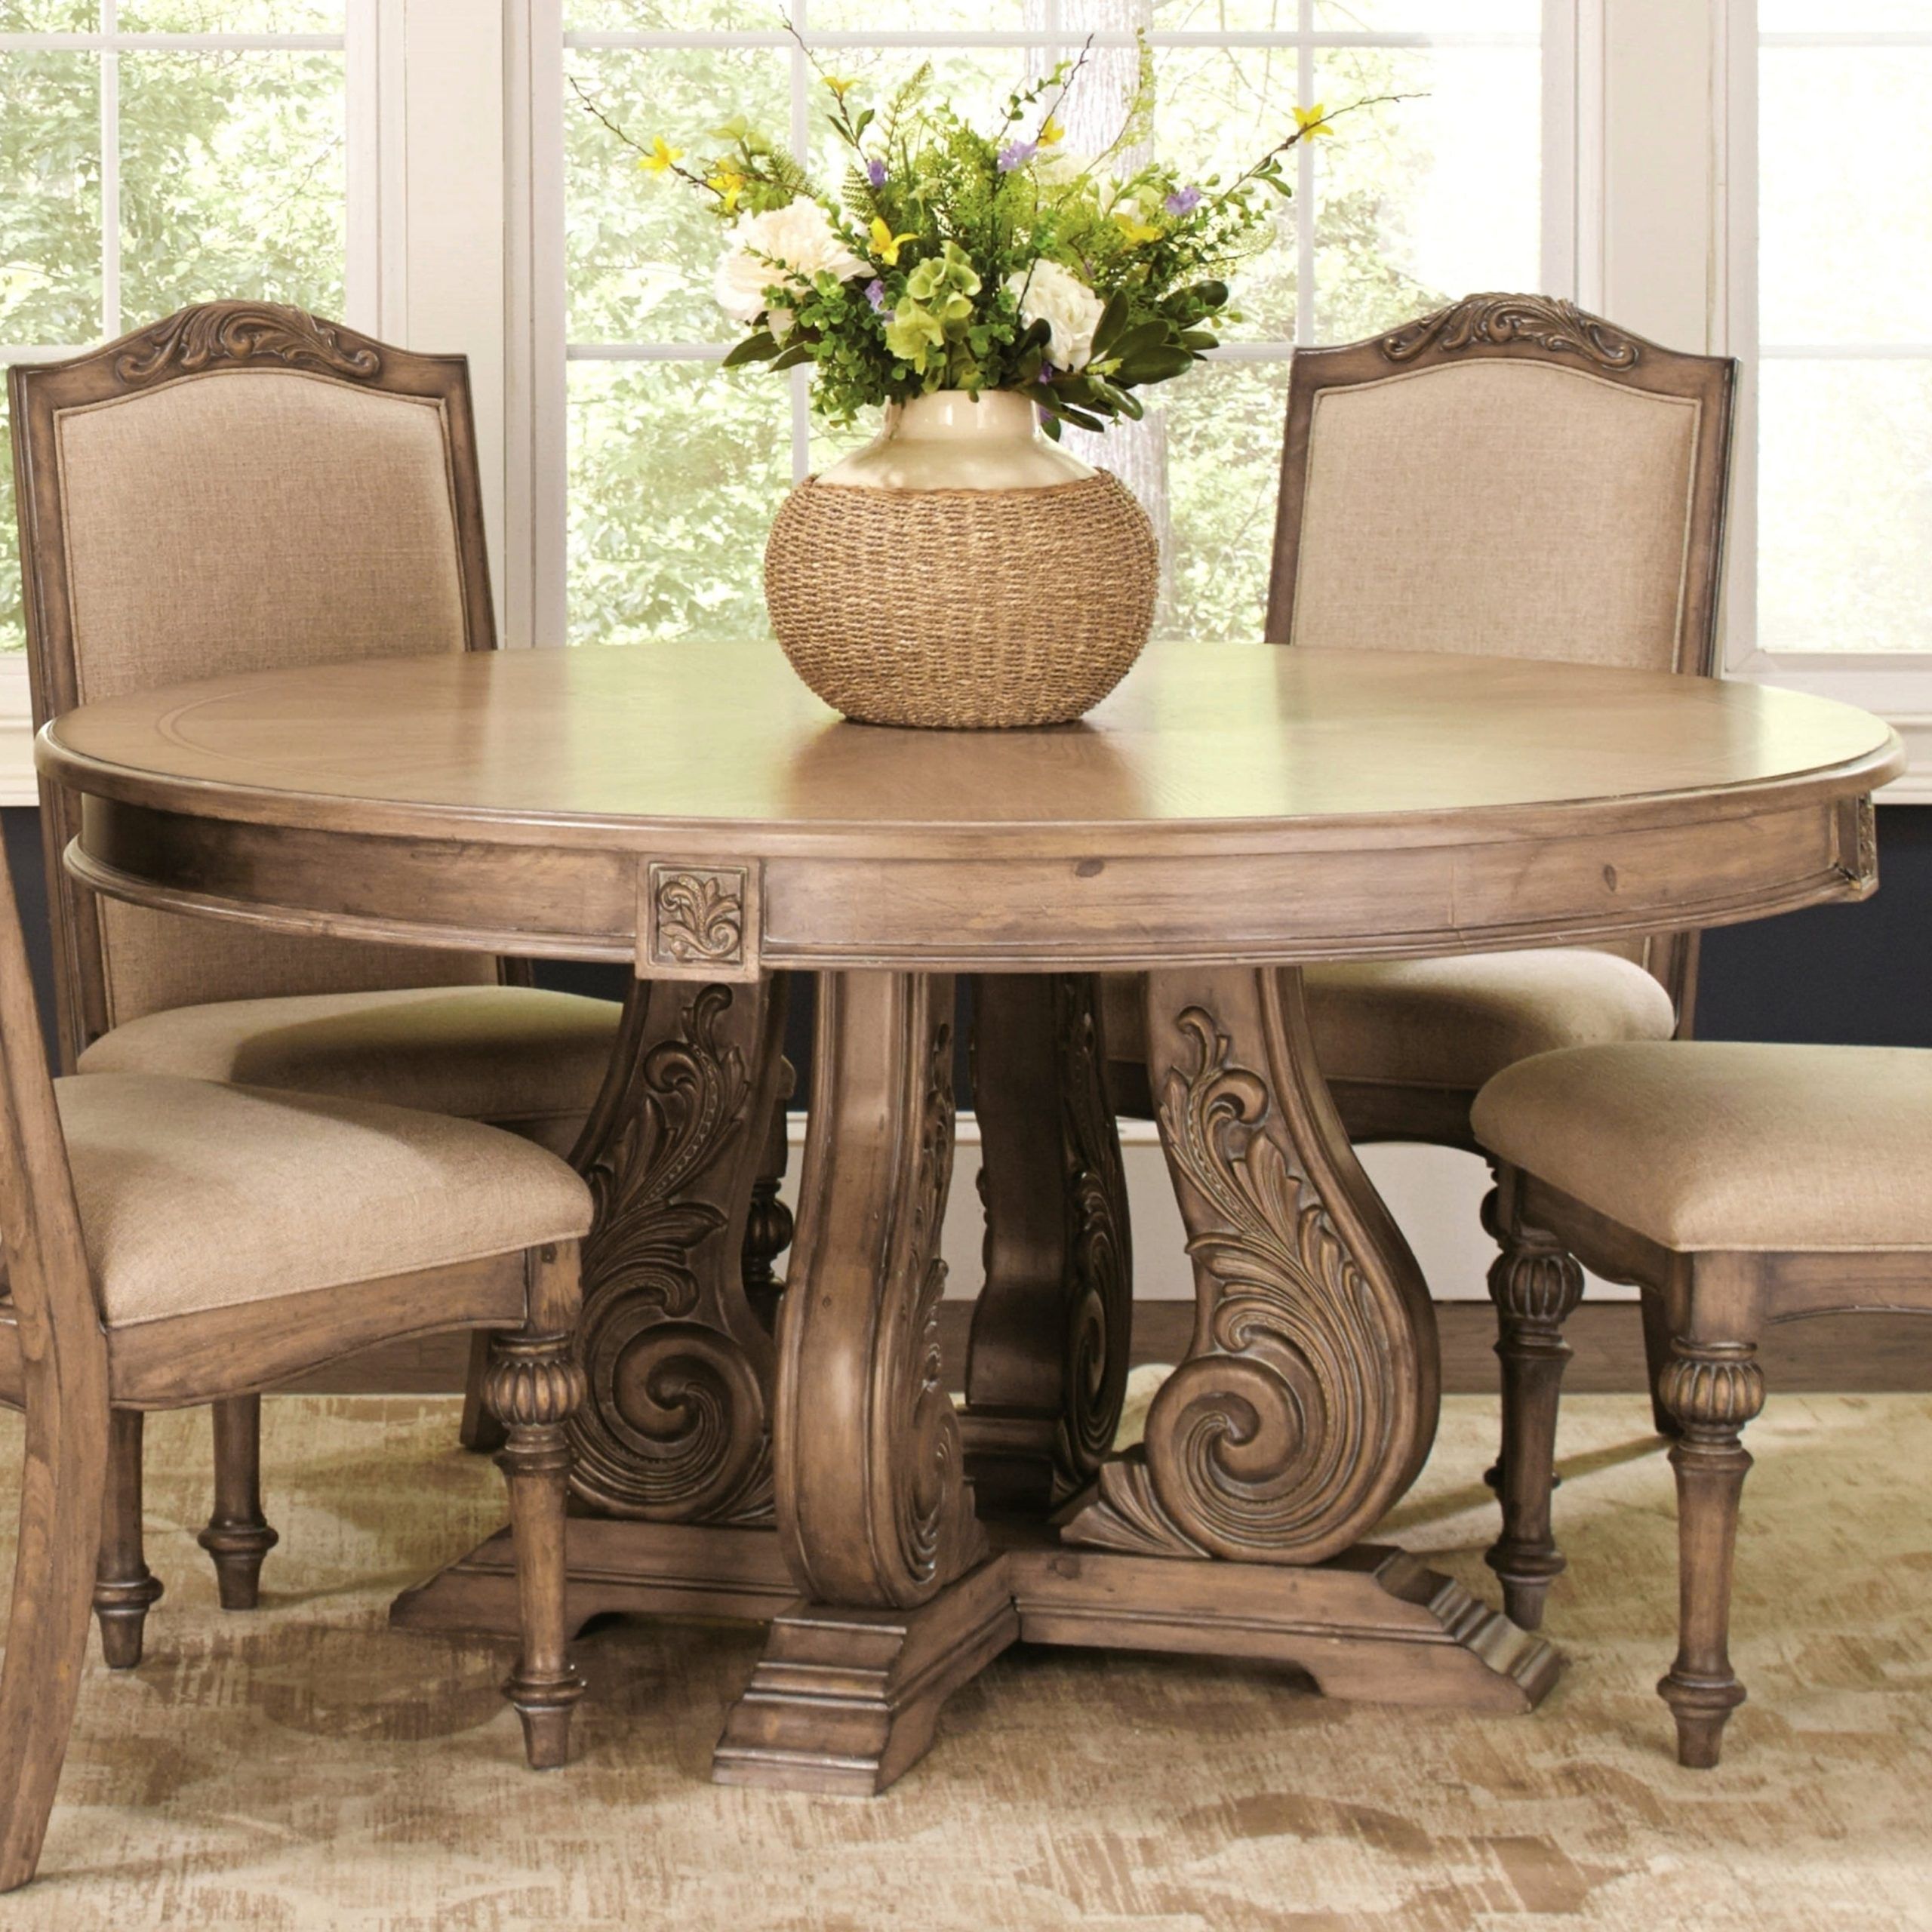 La Bauhinia French Antique Carved Wood Design Round Dining Table – Beige Pertaining To Most Recent Round Dining Tables (View 10 of 30)